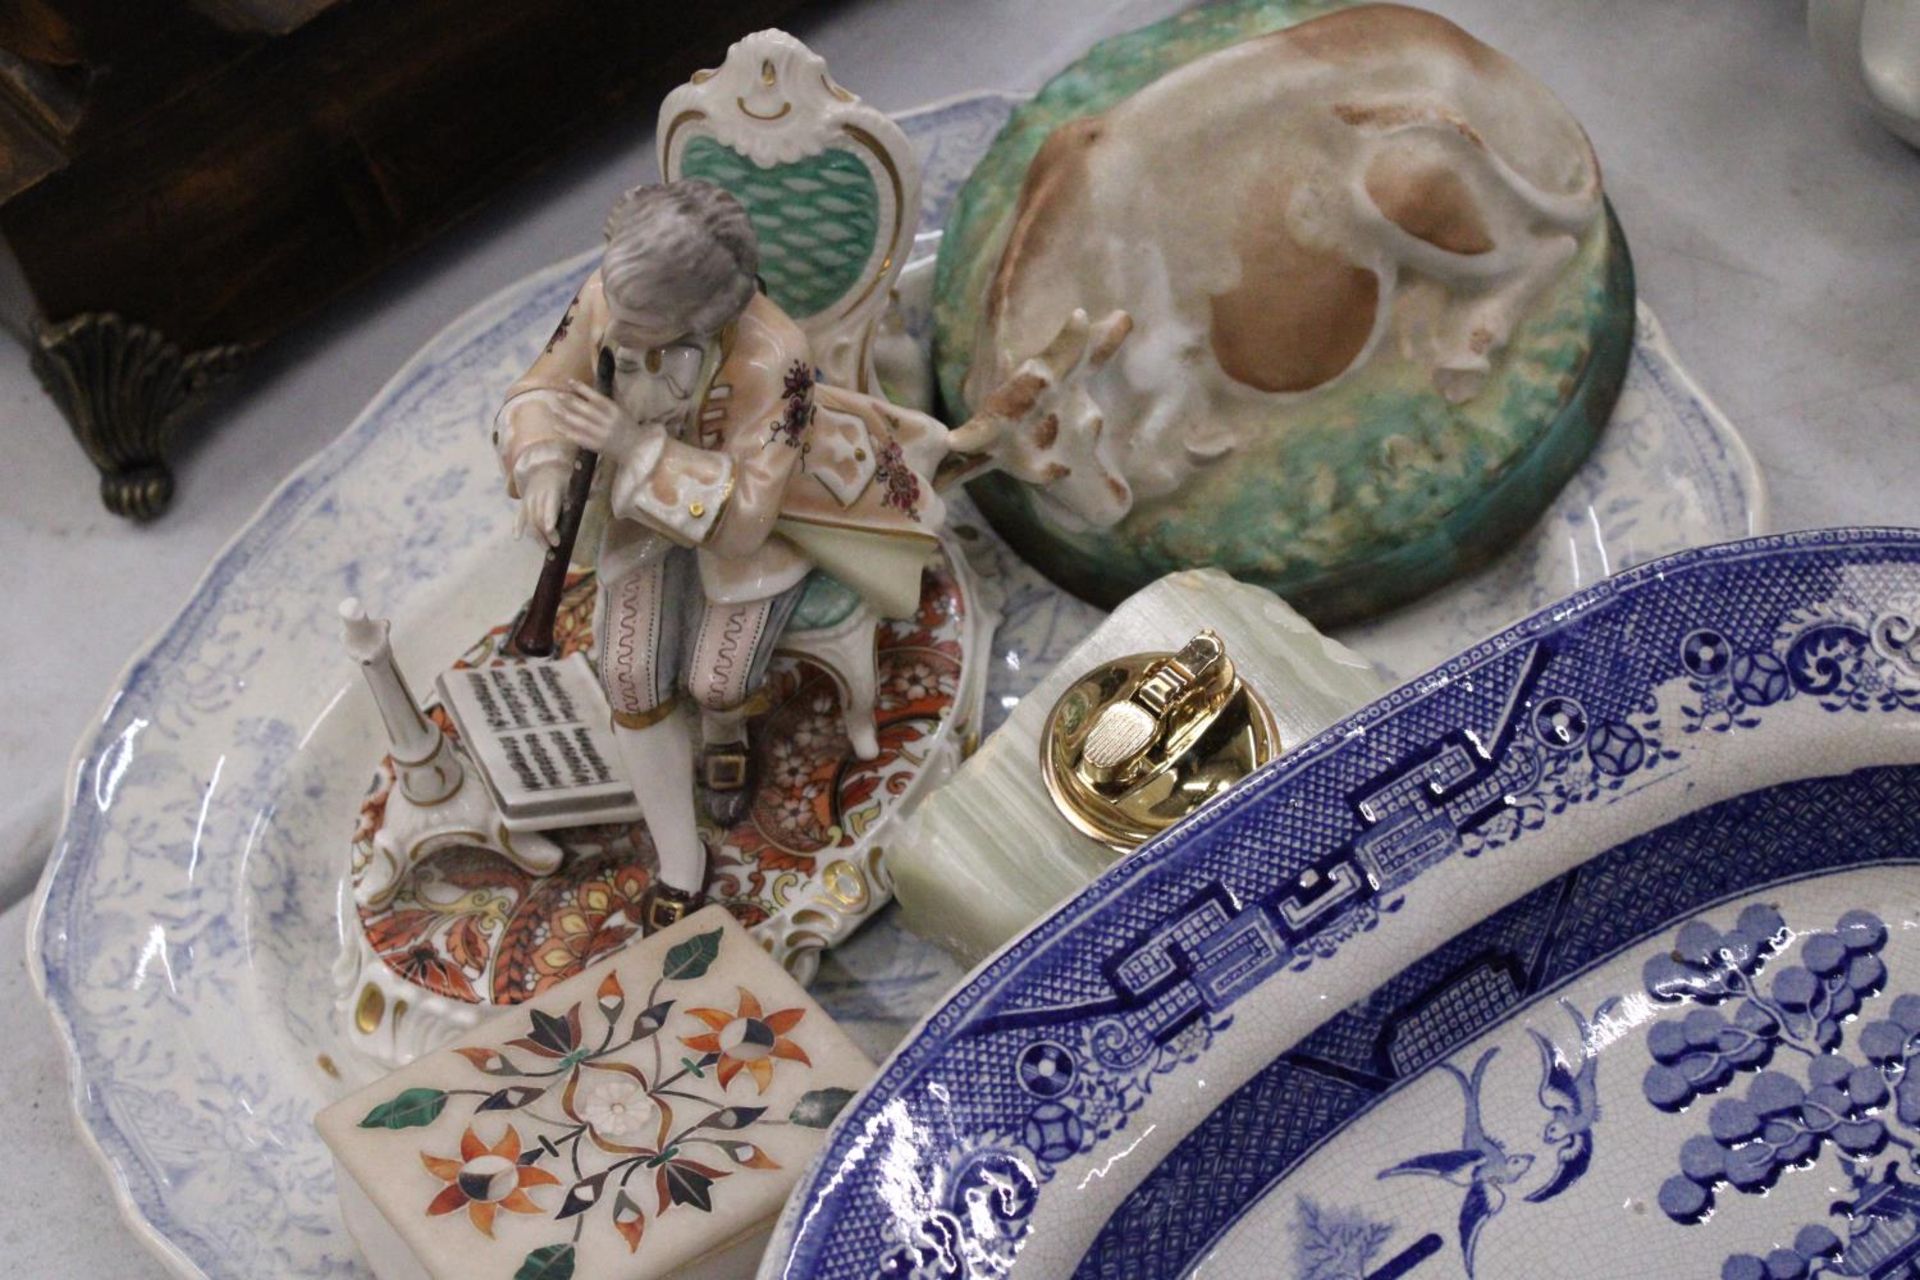 TWO VINTAGE BLUE AND WHITE PLATTERS, CABINET PLATES, AN ONYX TABLE LIGHTER, TRINKET BOX AND FIGURINE - Image 6 of 6